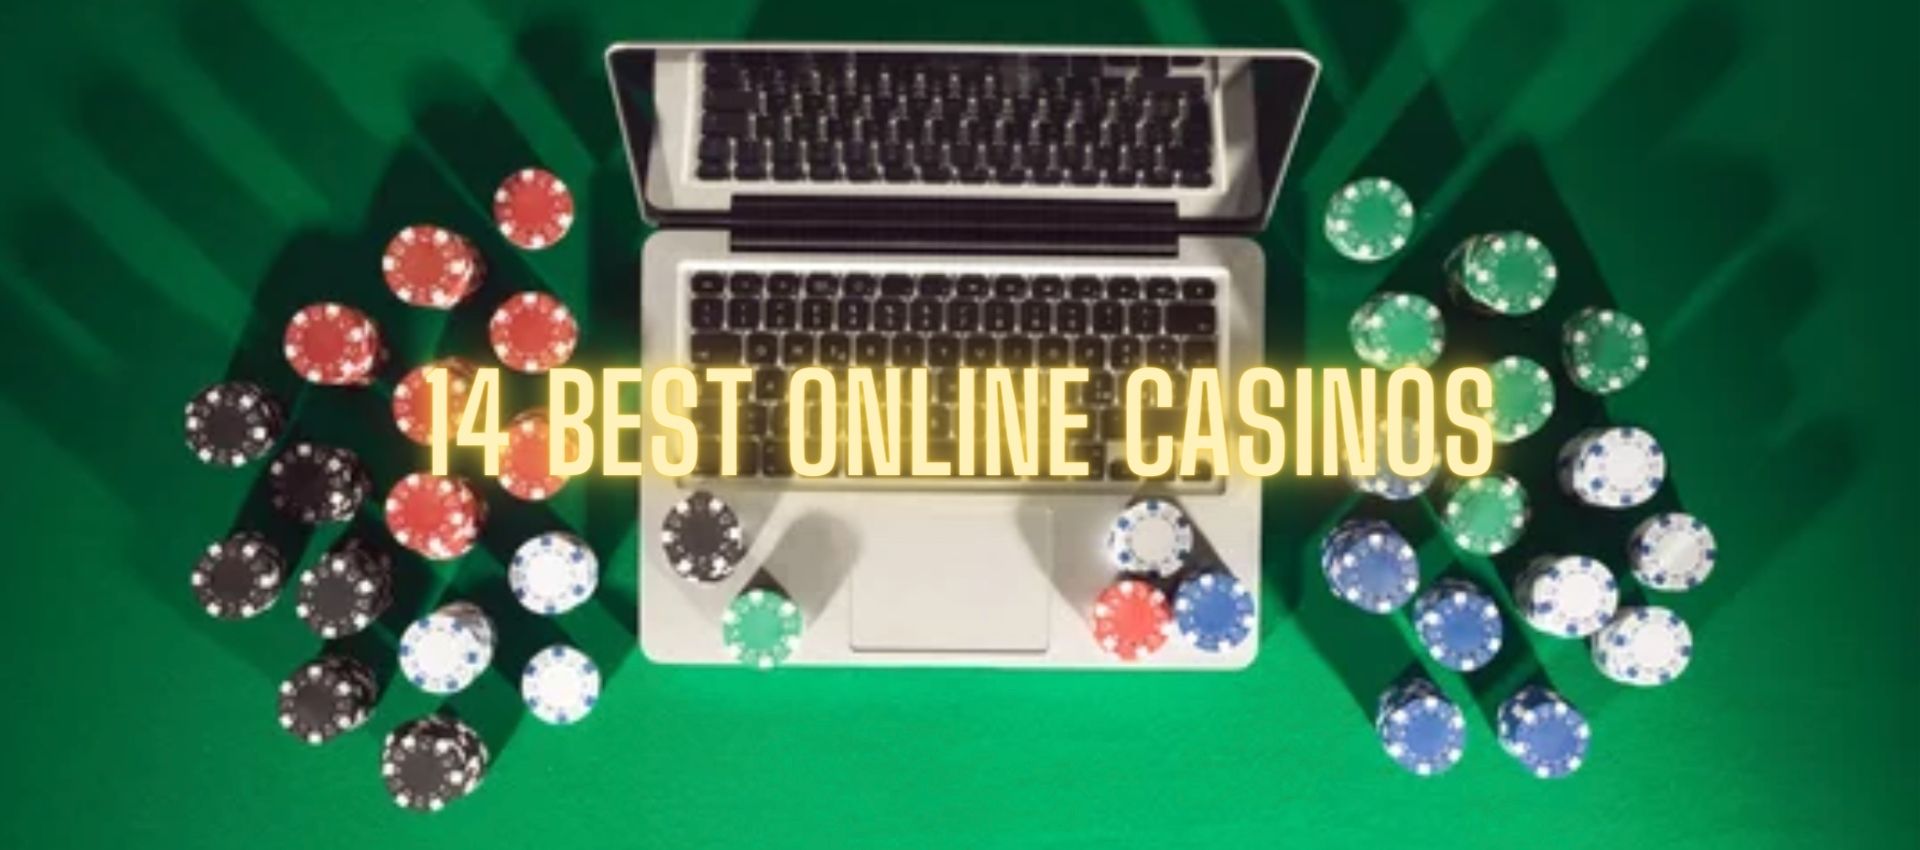 Top 14 online casinos list for gambling in India